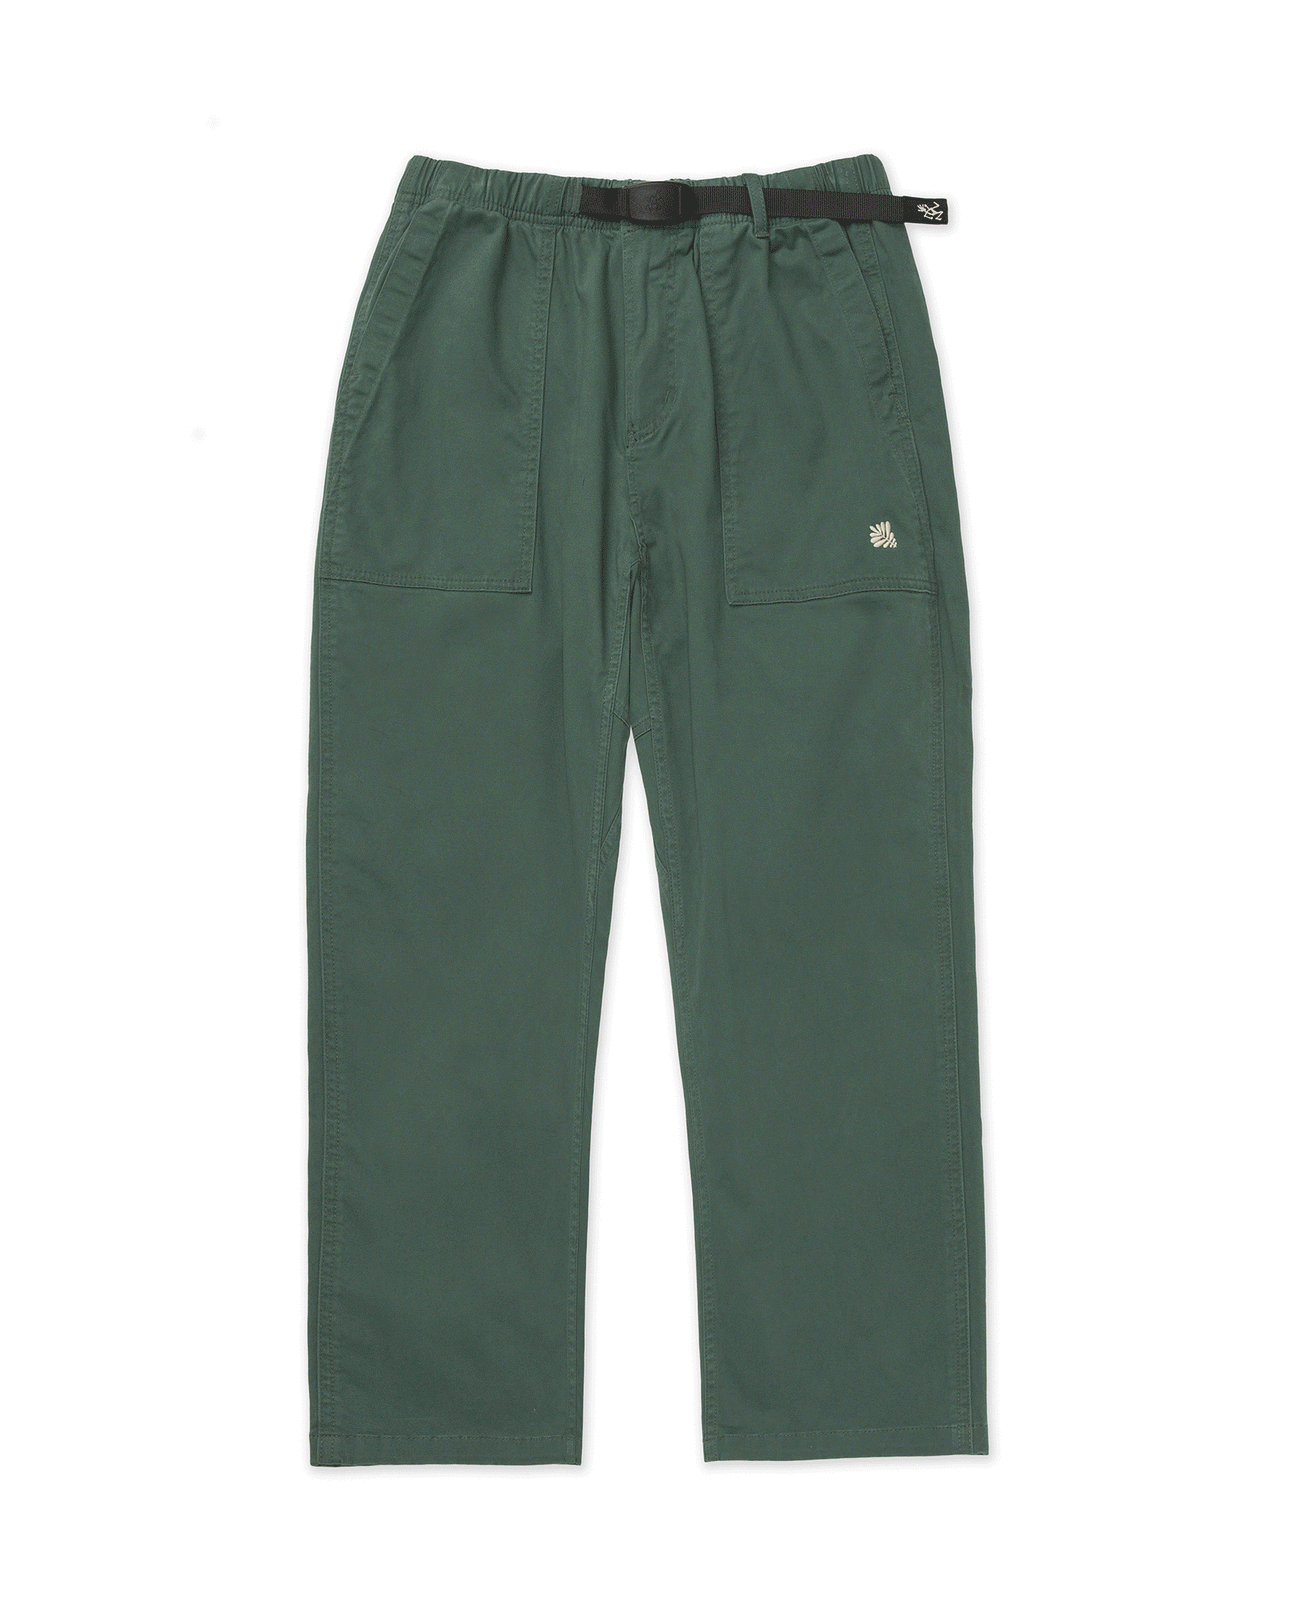 Shop Big Sur Ferns Gramicci Loose Tapered Pant Inspired by Big Sur ...